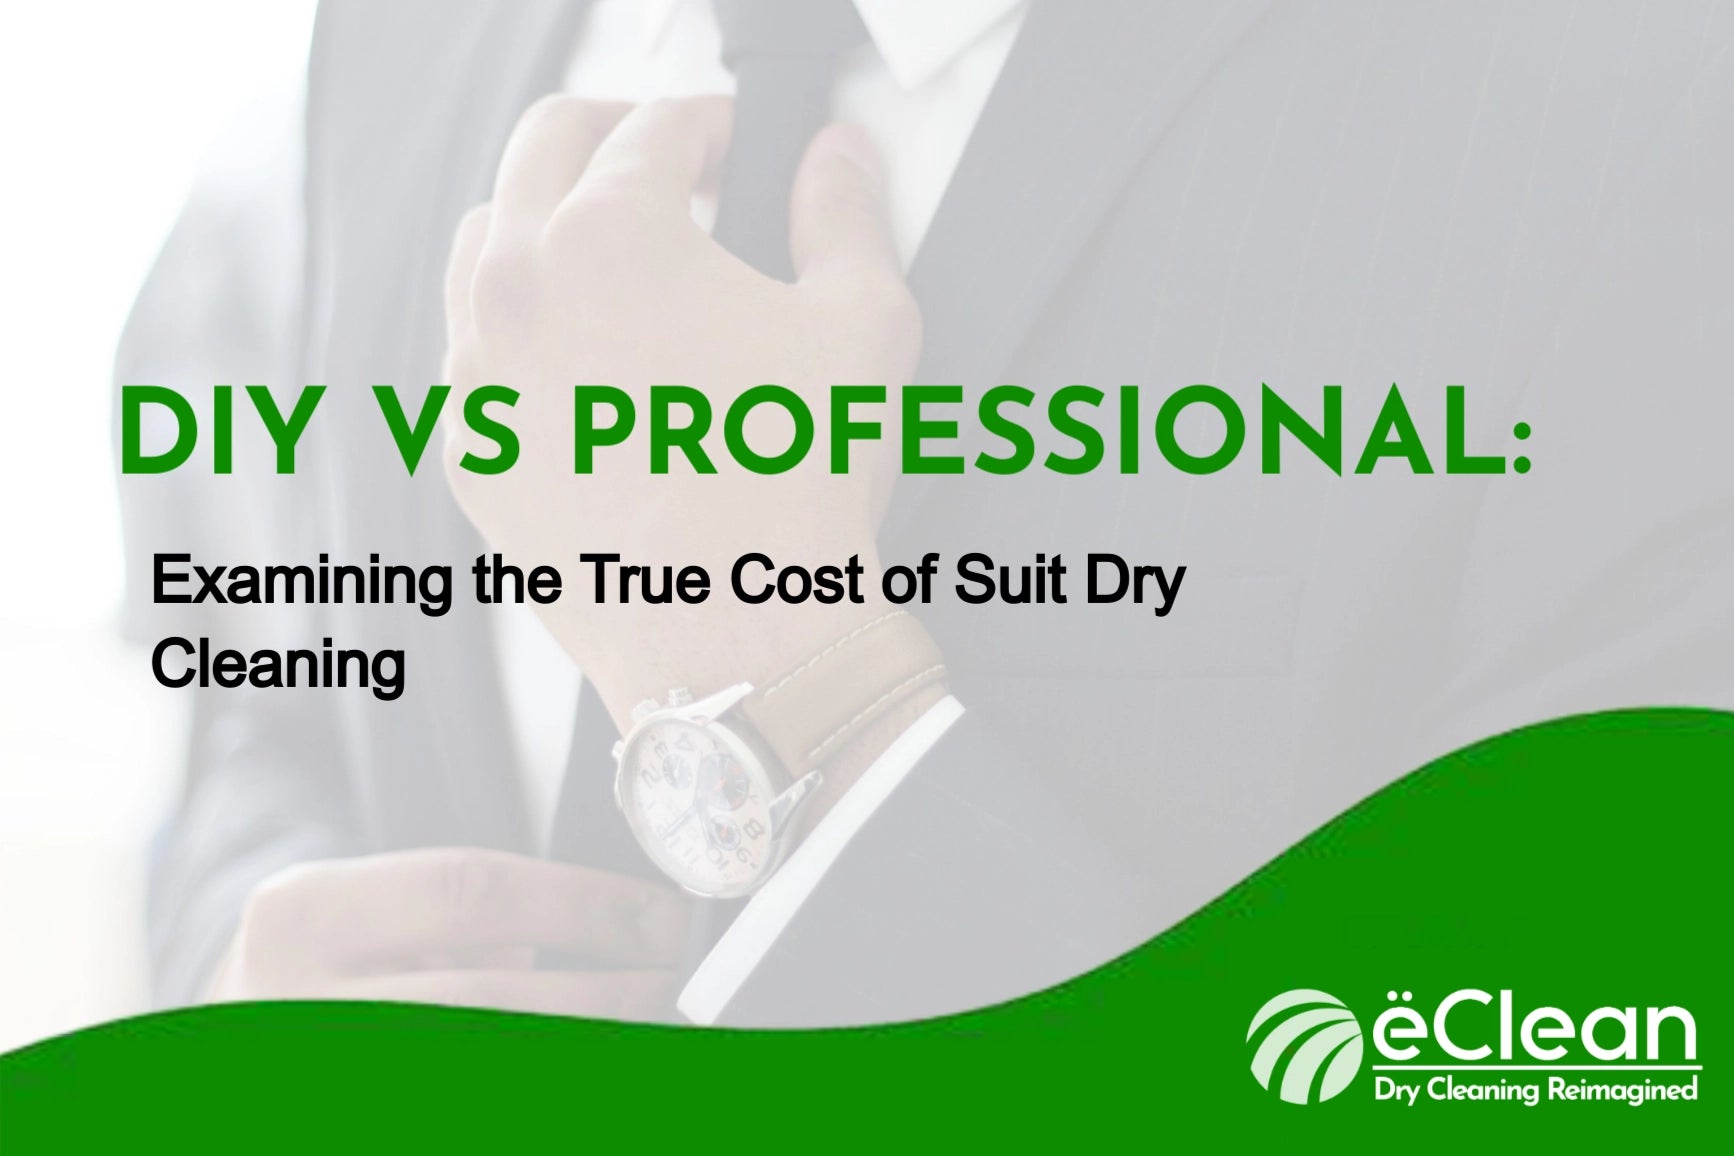 DIY vs. Professional: Examining the True Cost of Suit Dry Cleaning